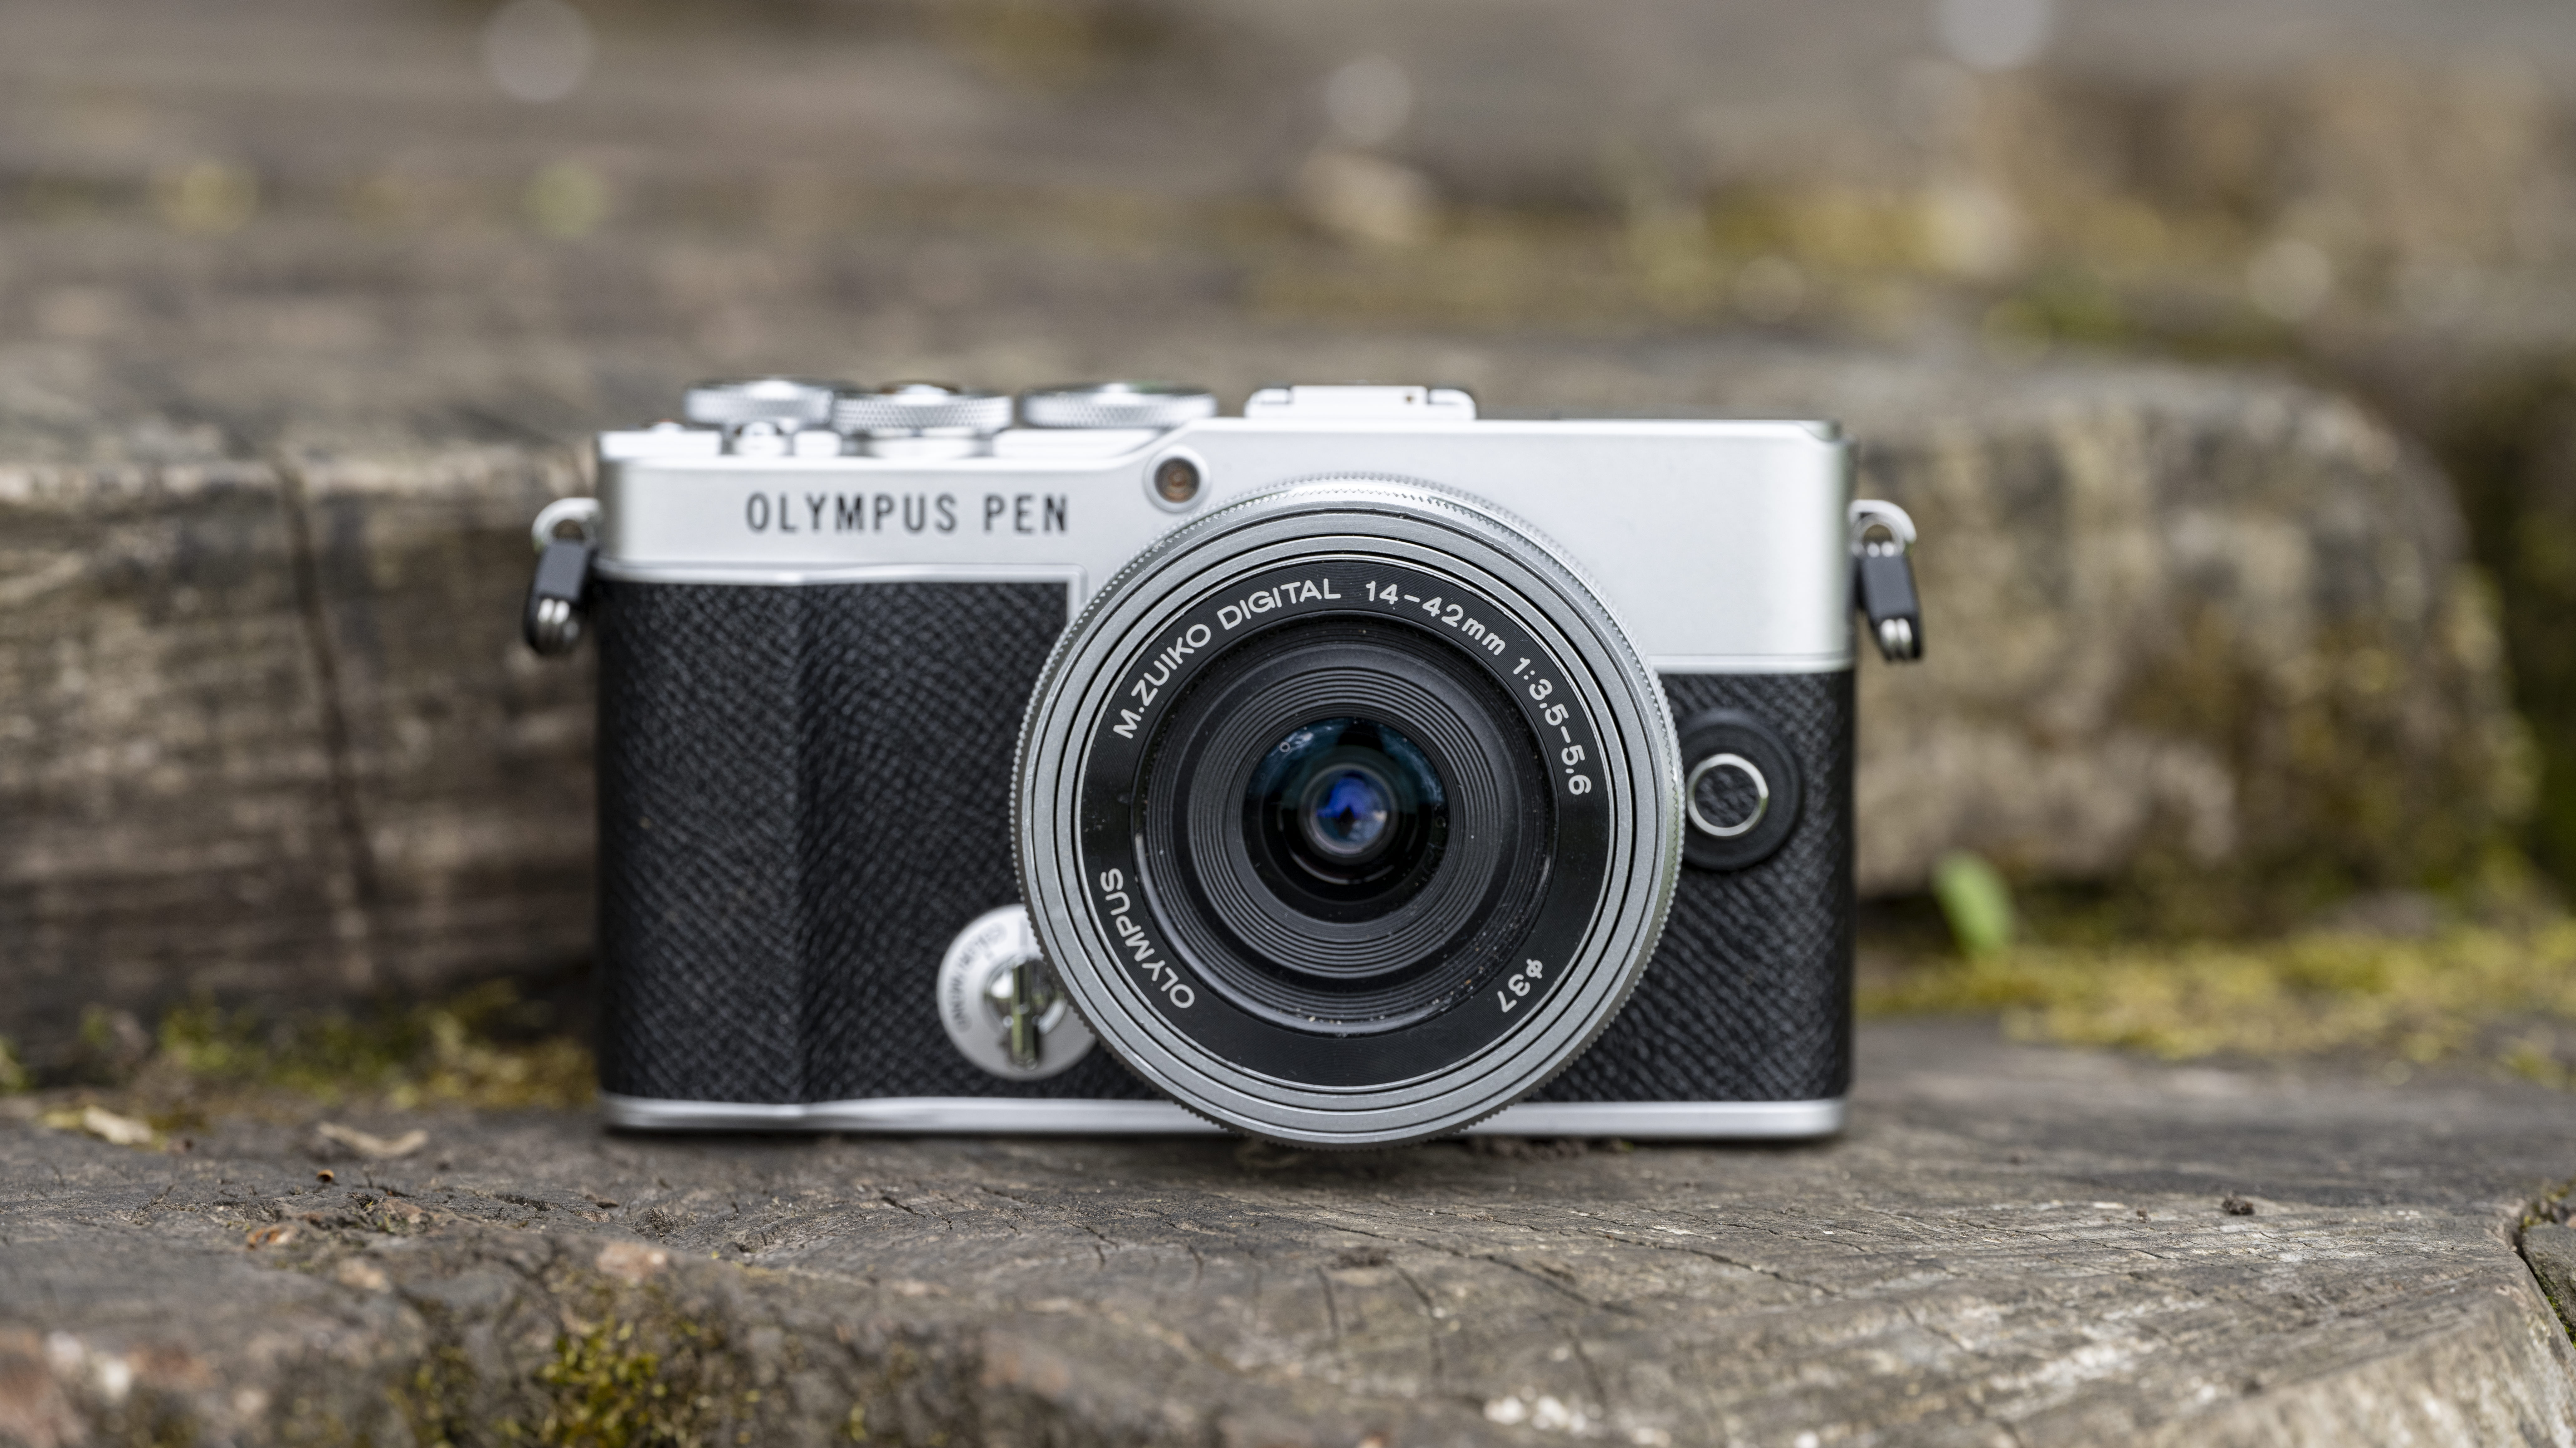 The Olympus PEN E-P7 with its 14-42mm kit lens